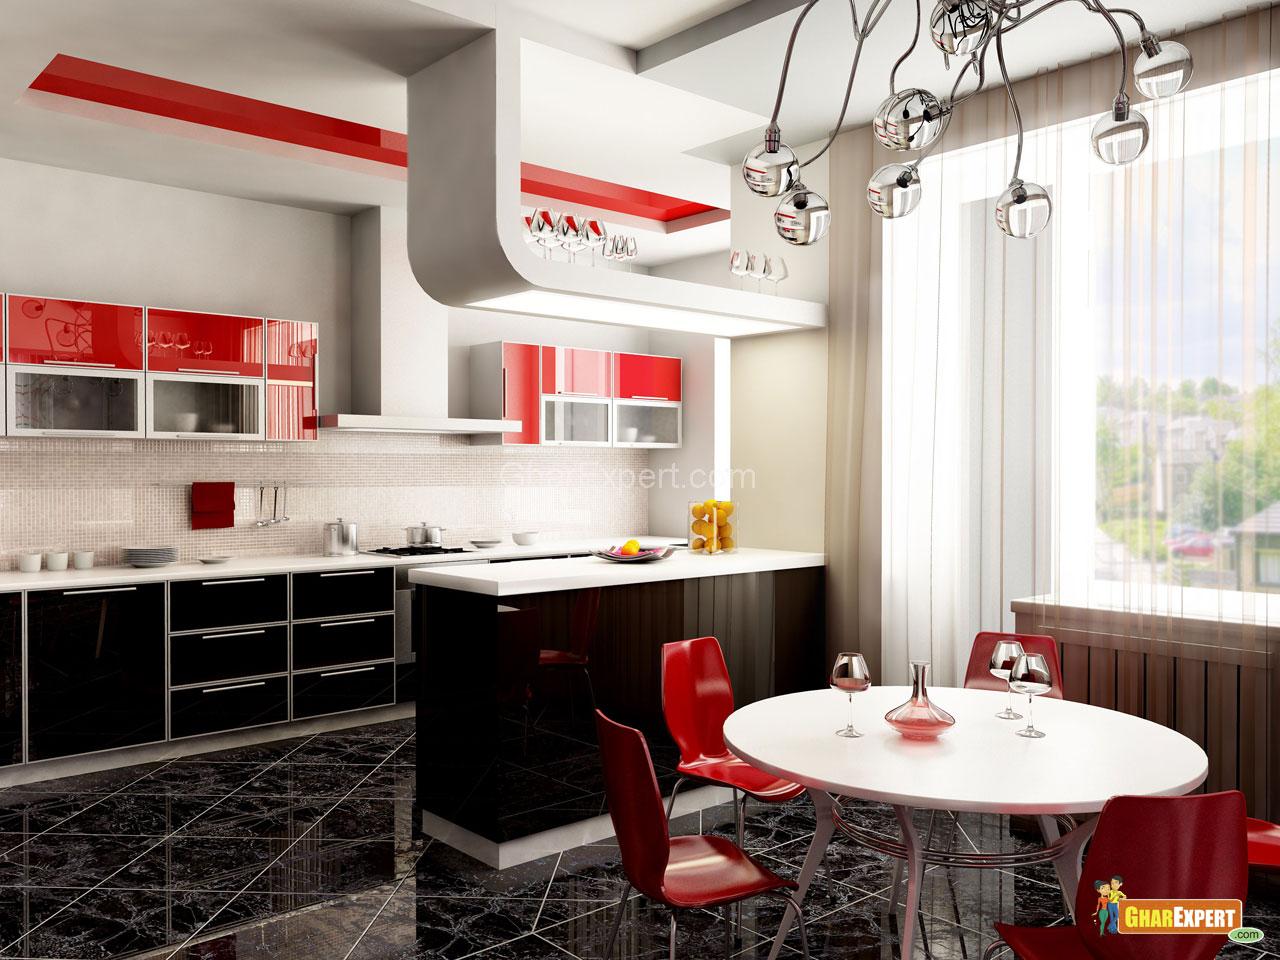 A pop art kitchen with red and black furniture.